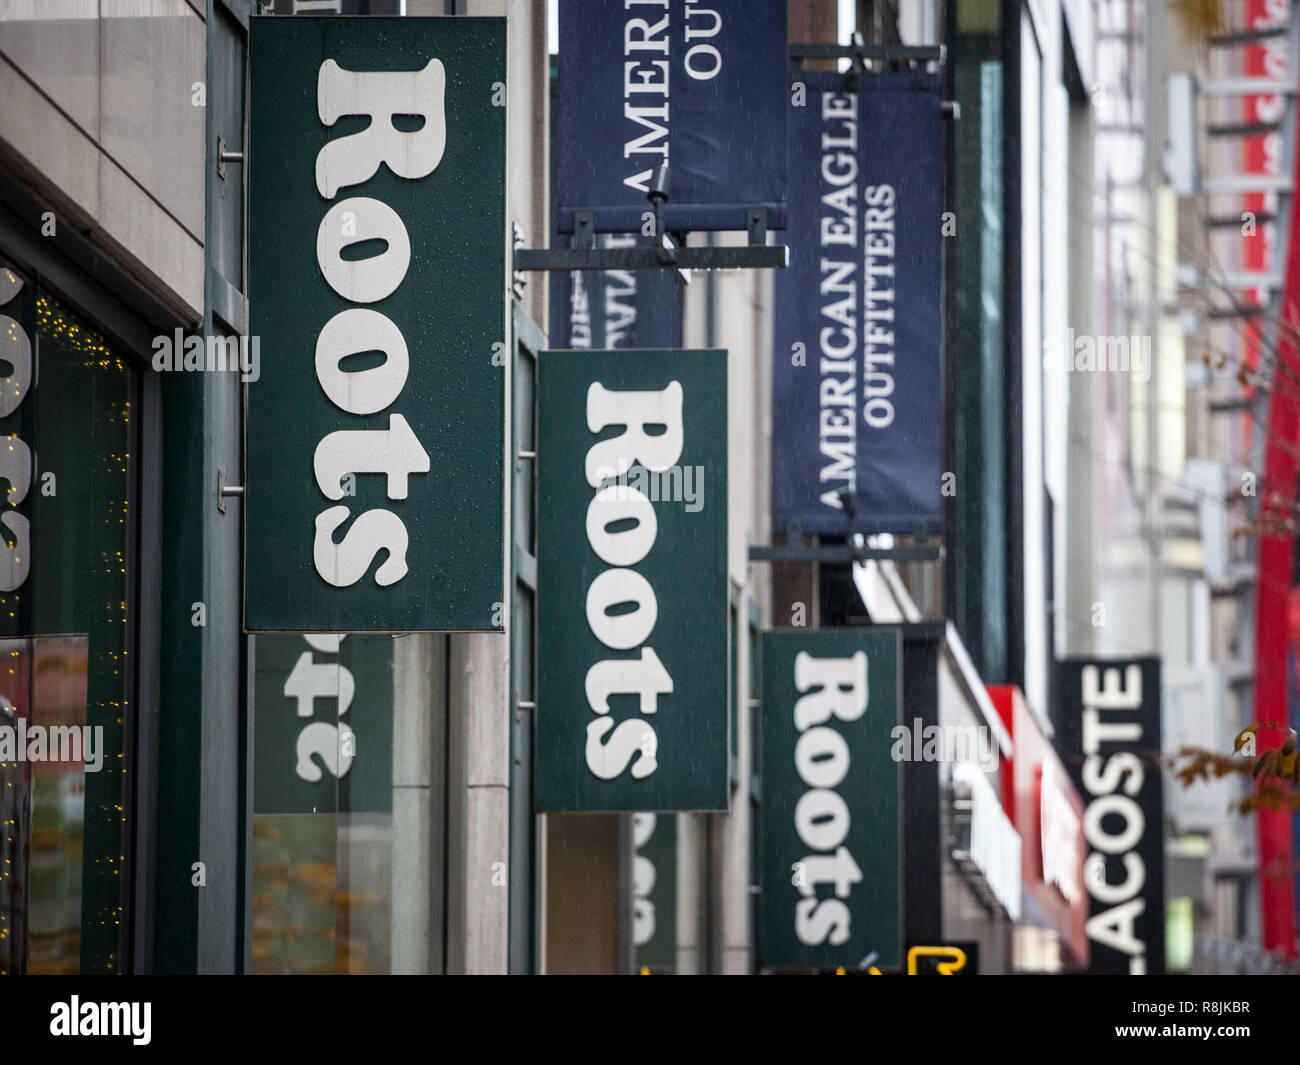 MONTREAL, CANADA - NOVEMBER 5, 2018: Roots Canada logo in front of their local boutique in Montreal. Roots Canada is a Canadian fashion retailer selli Stock Photo